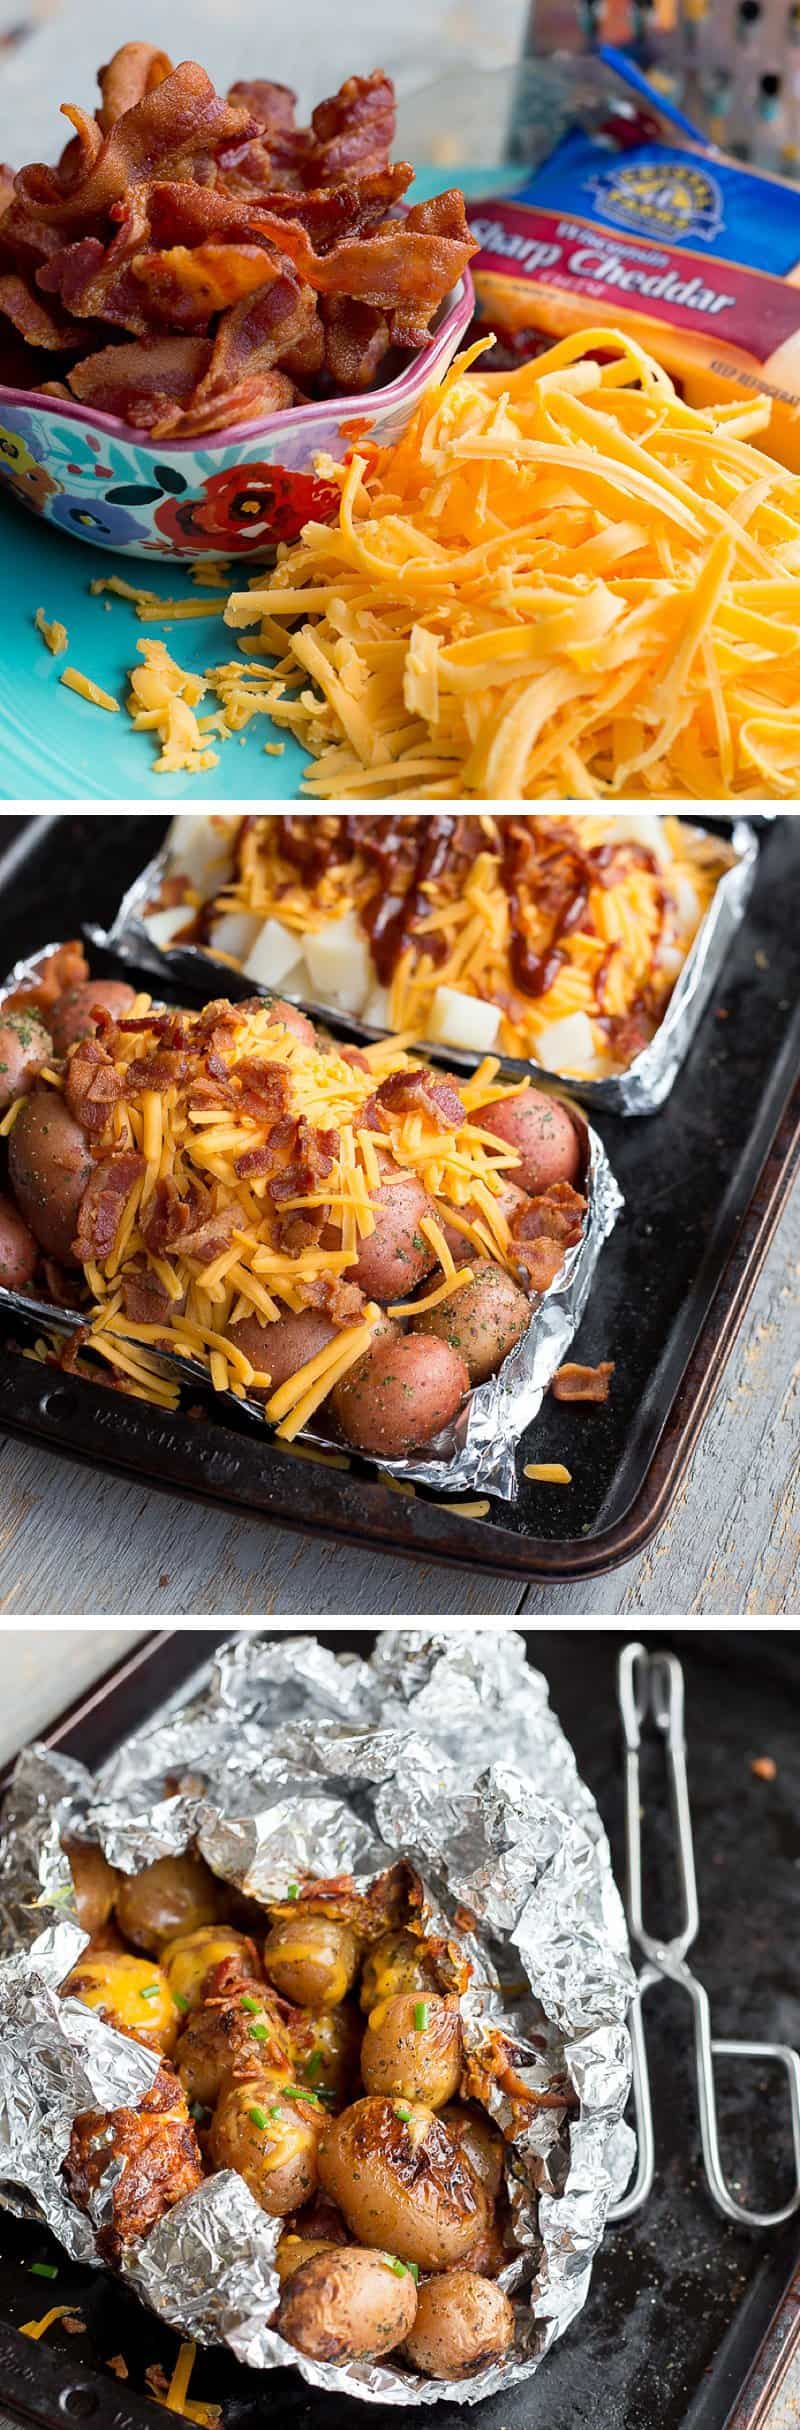 Loaded Potato Foil Packets — New potatoes covered in seasoned salt, melted butter, sharp cheddar cheese, topped with fresh bacon crumbles and served with a side of sour cream. You have to make these crazy-easy grilled potato bundles this summer. These foil wrapped potato packets are super simple and delicious. Perfect for camping or just a quick family dinner. *Saving this for later!